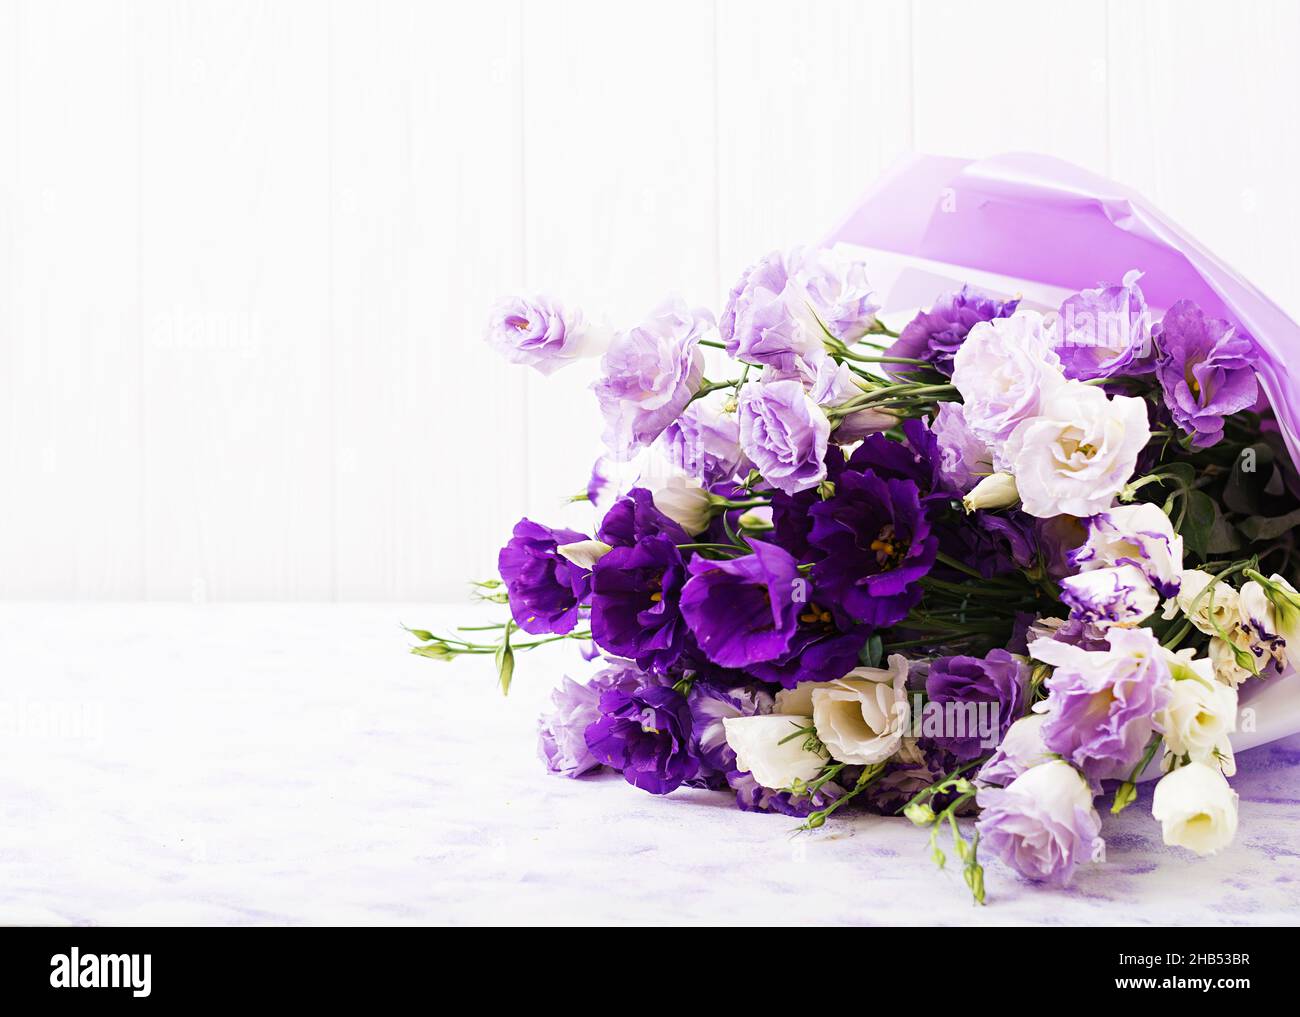 Beautiful flowers bouquet mix of white, purple and violet eustoma. Stock Photo